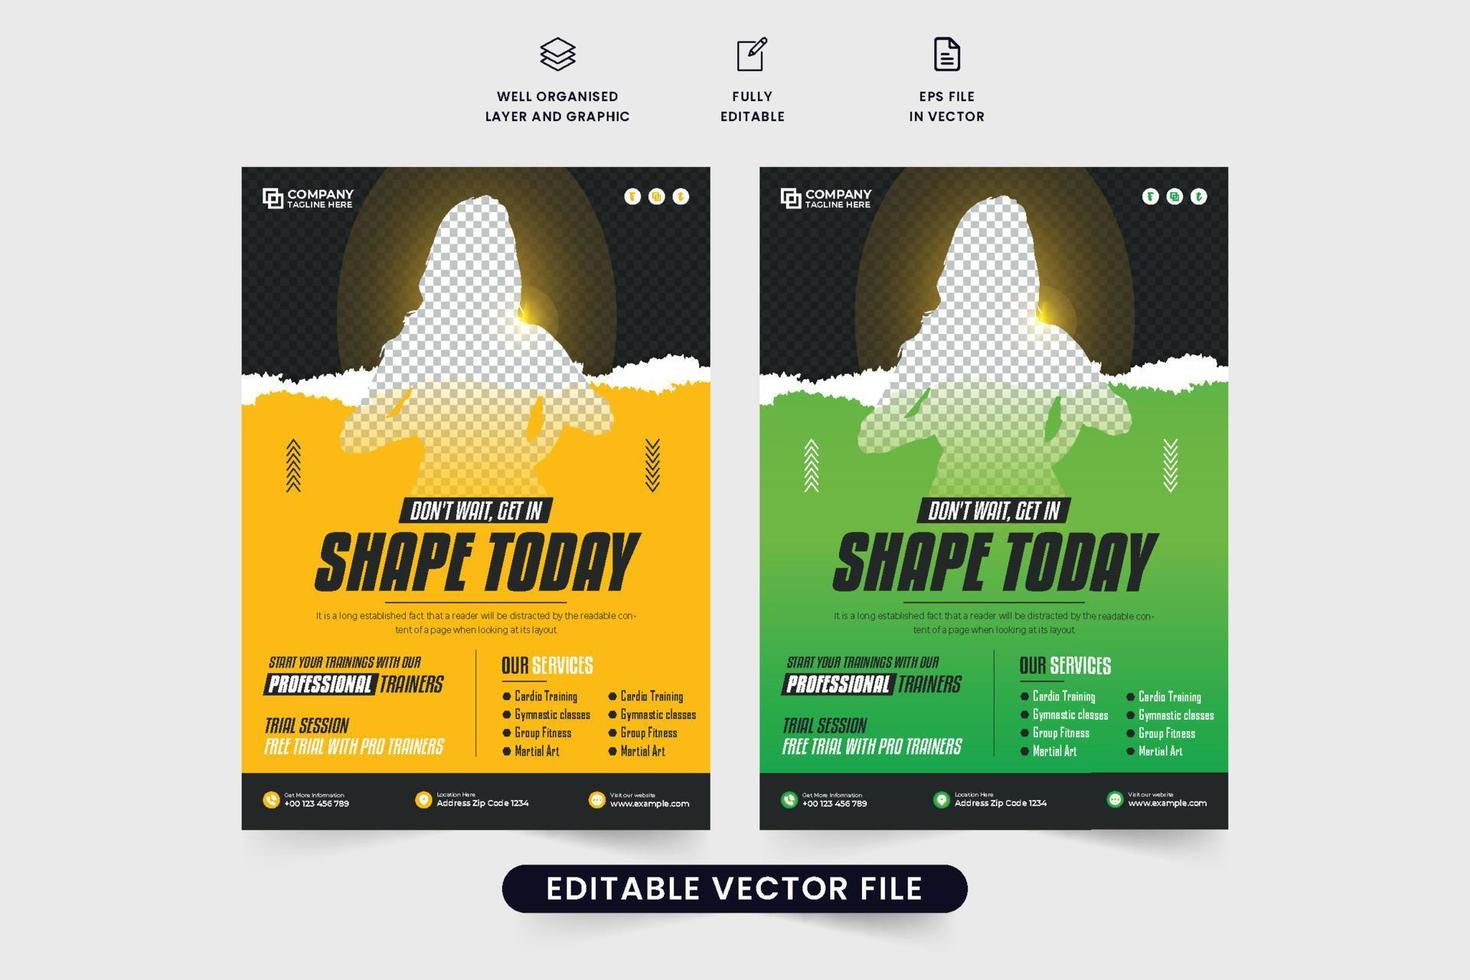 Fitness gym center promotional poster and flyer layout vector for marketing. Gym business advertisement flyer template with yellow and green colors. Fitness shop banner design for body building.